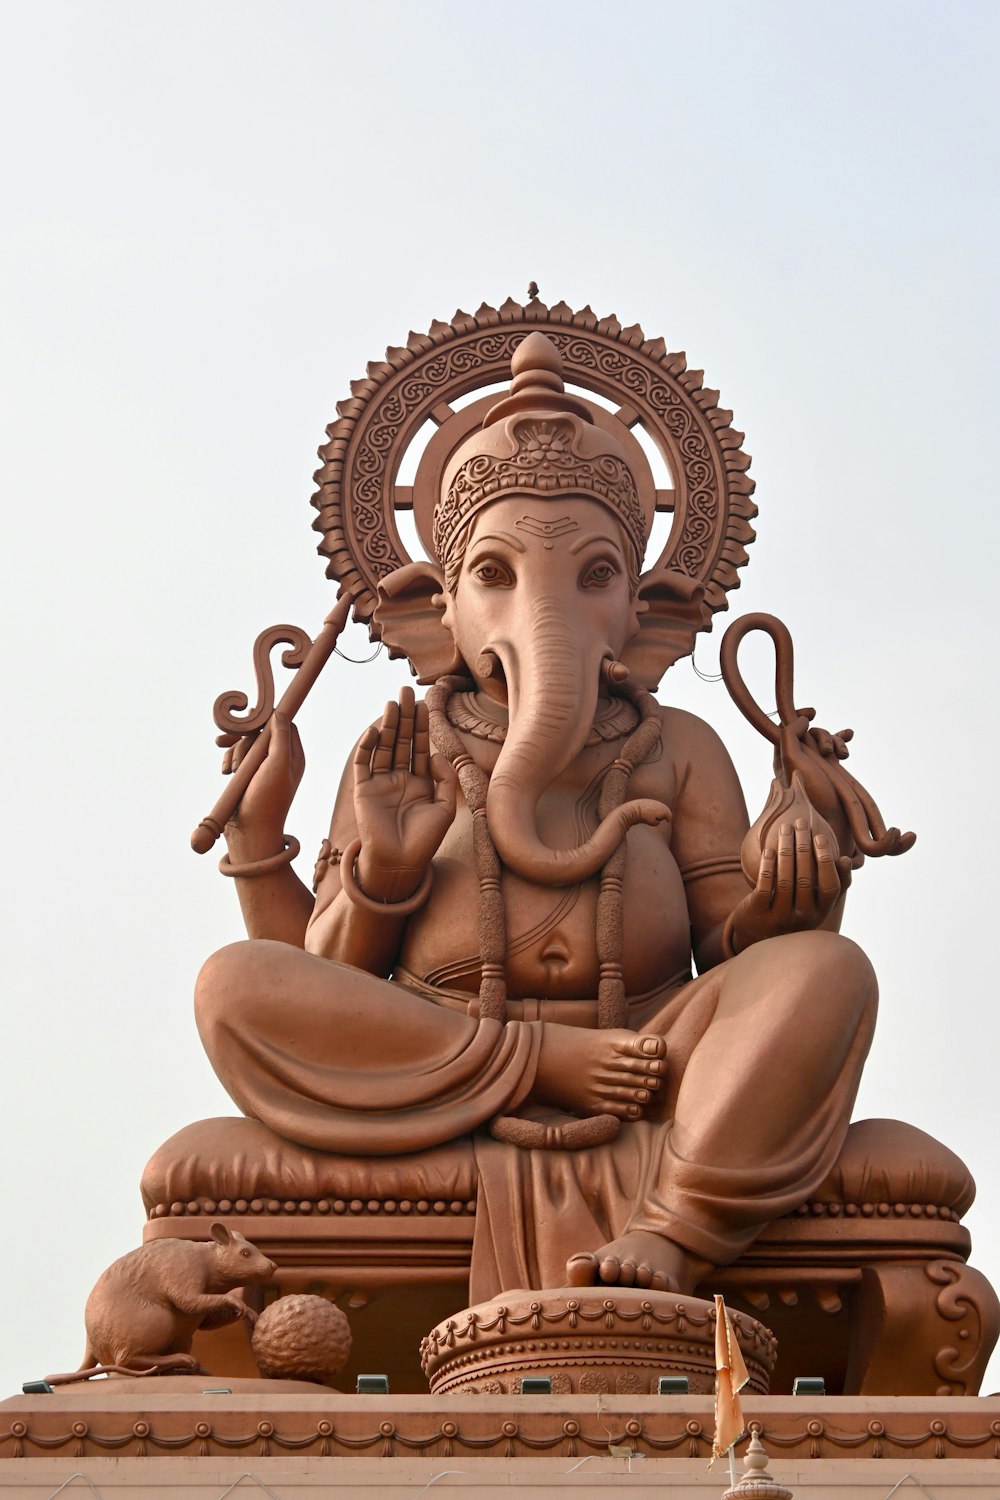 a statue of an elephant sitting on top of a building